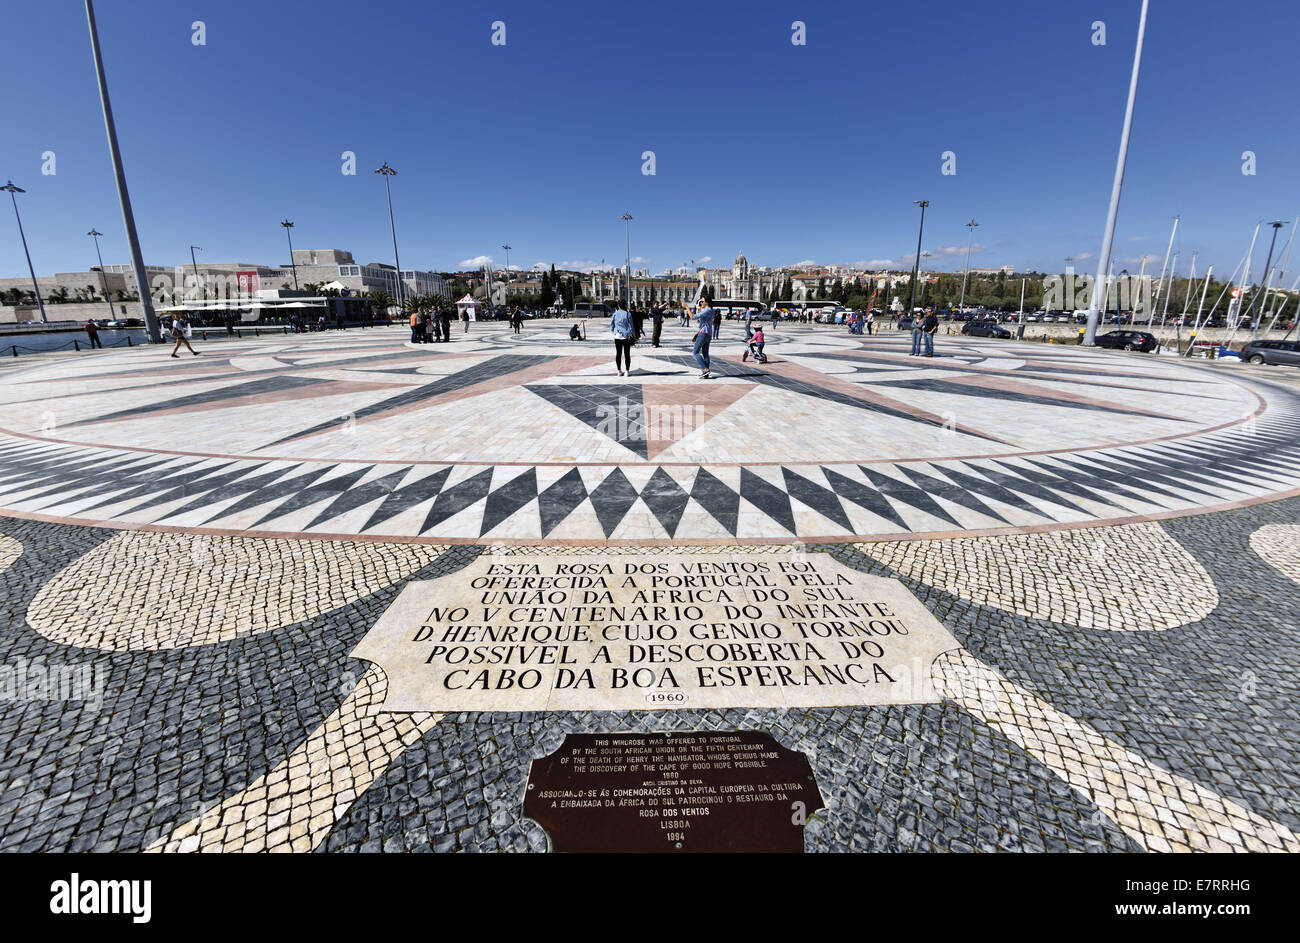 Portugal, Lisbon, Belem, windrose, dial rose, compass rose, people, tourists, memory, discoveries, Prince Henry the Navigator, sun, sunny, bright light, discovering Lisbon, monumental, portuguese history, present of South Africa, travel, tourism, portugues Stock Photo